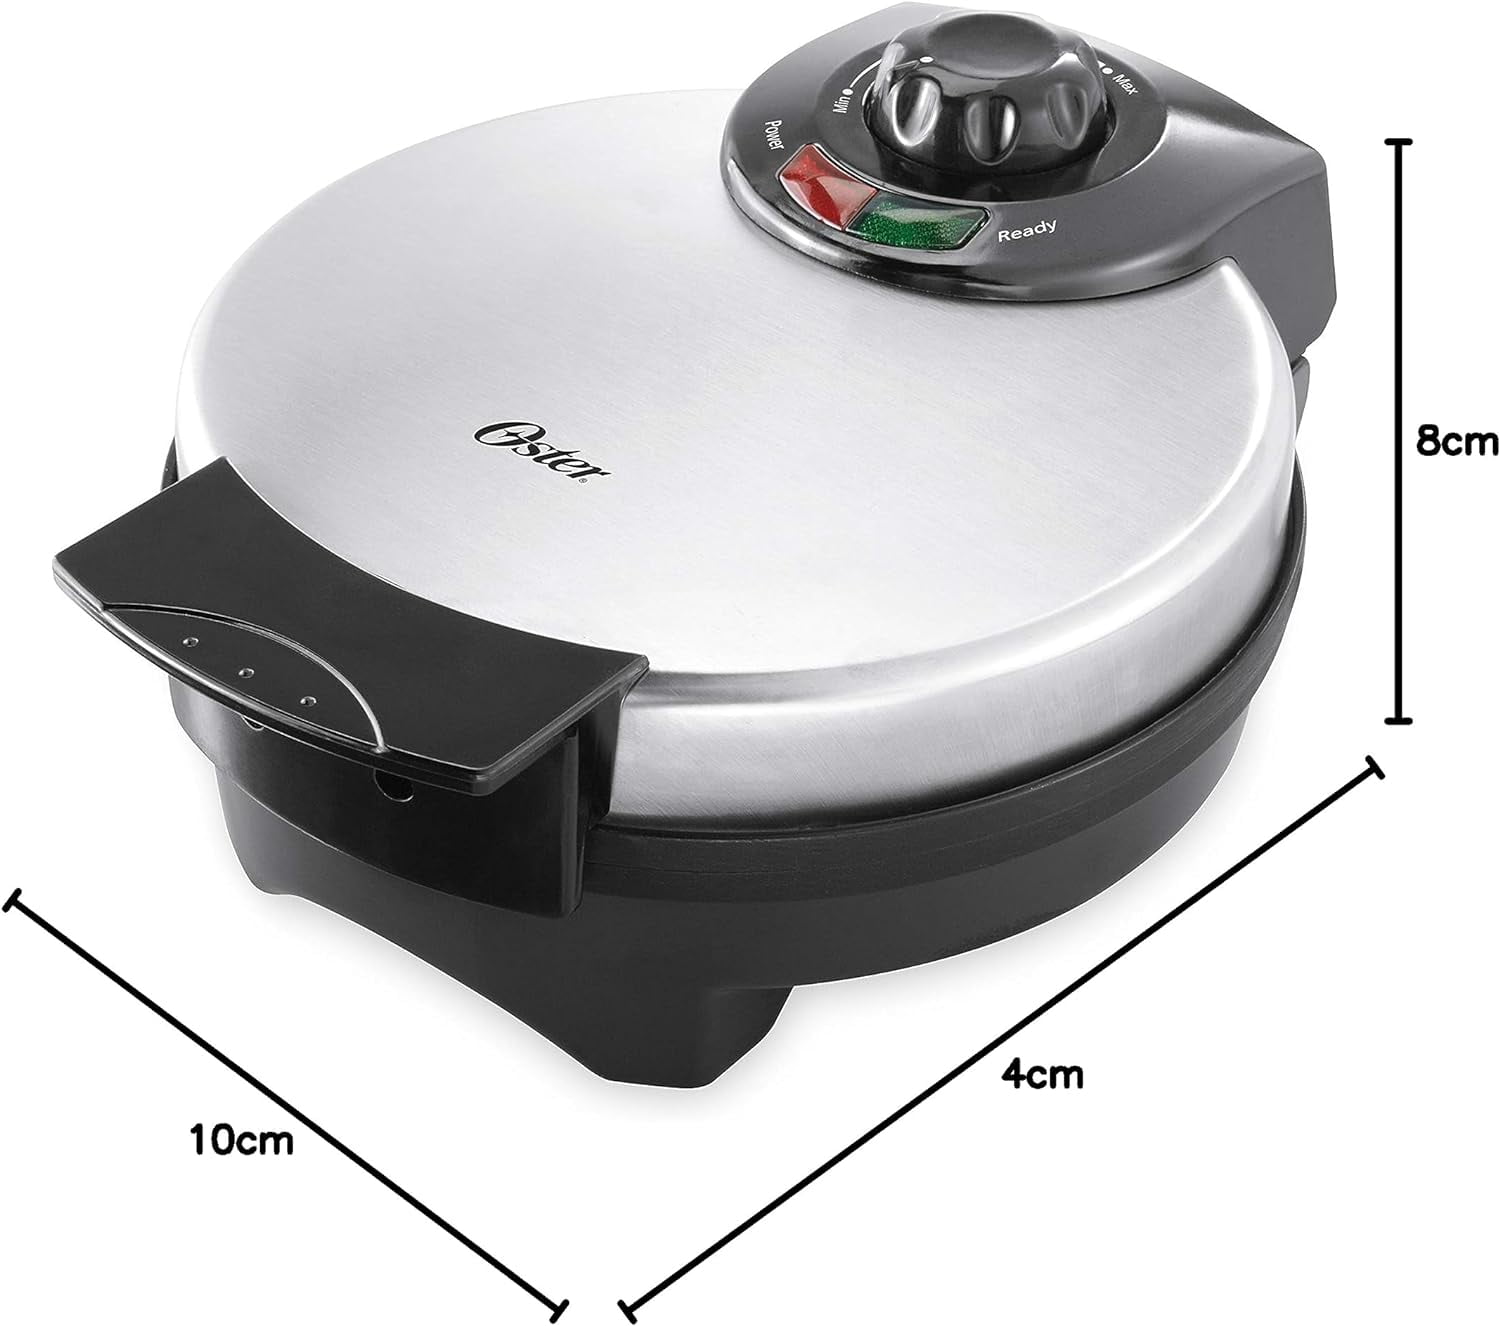 NicoPower Stick Waffle Maker  Stainless Steel with Manual Control